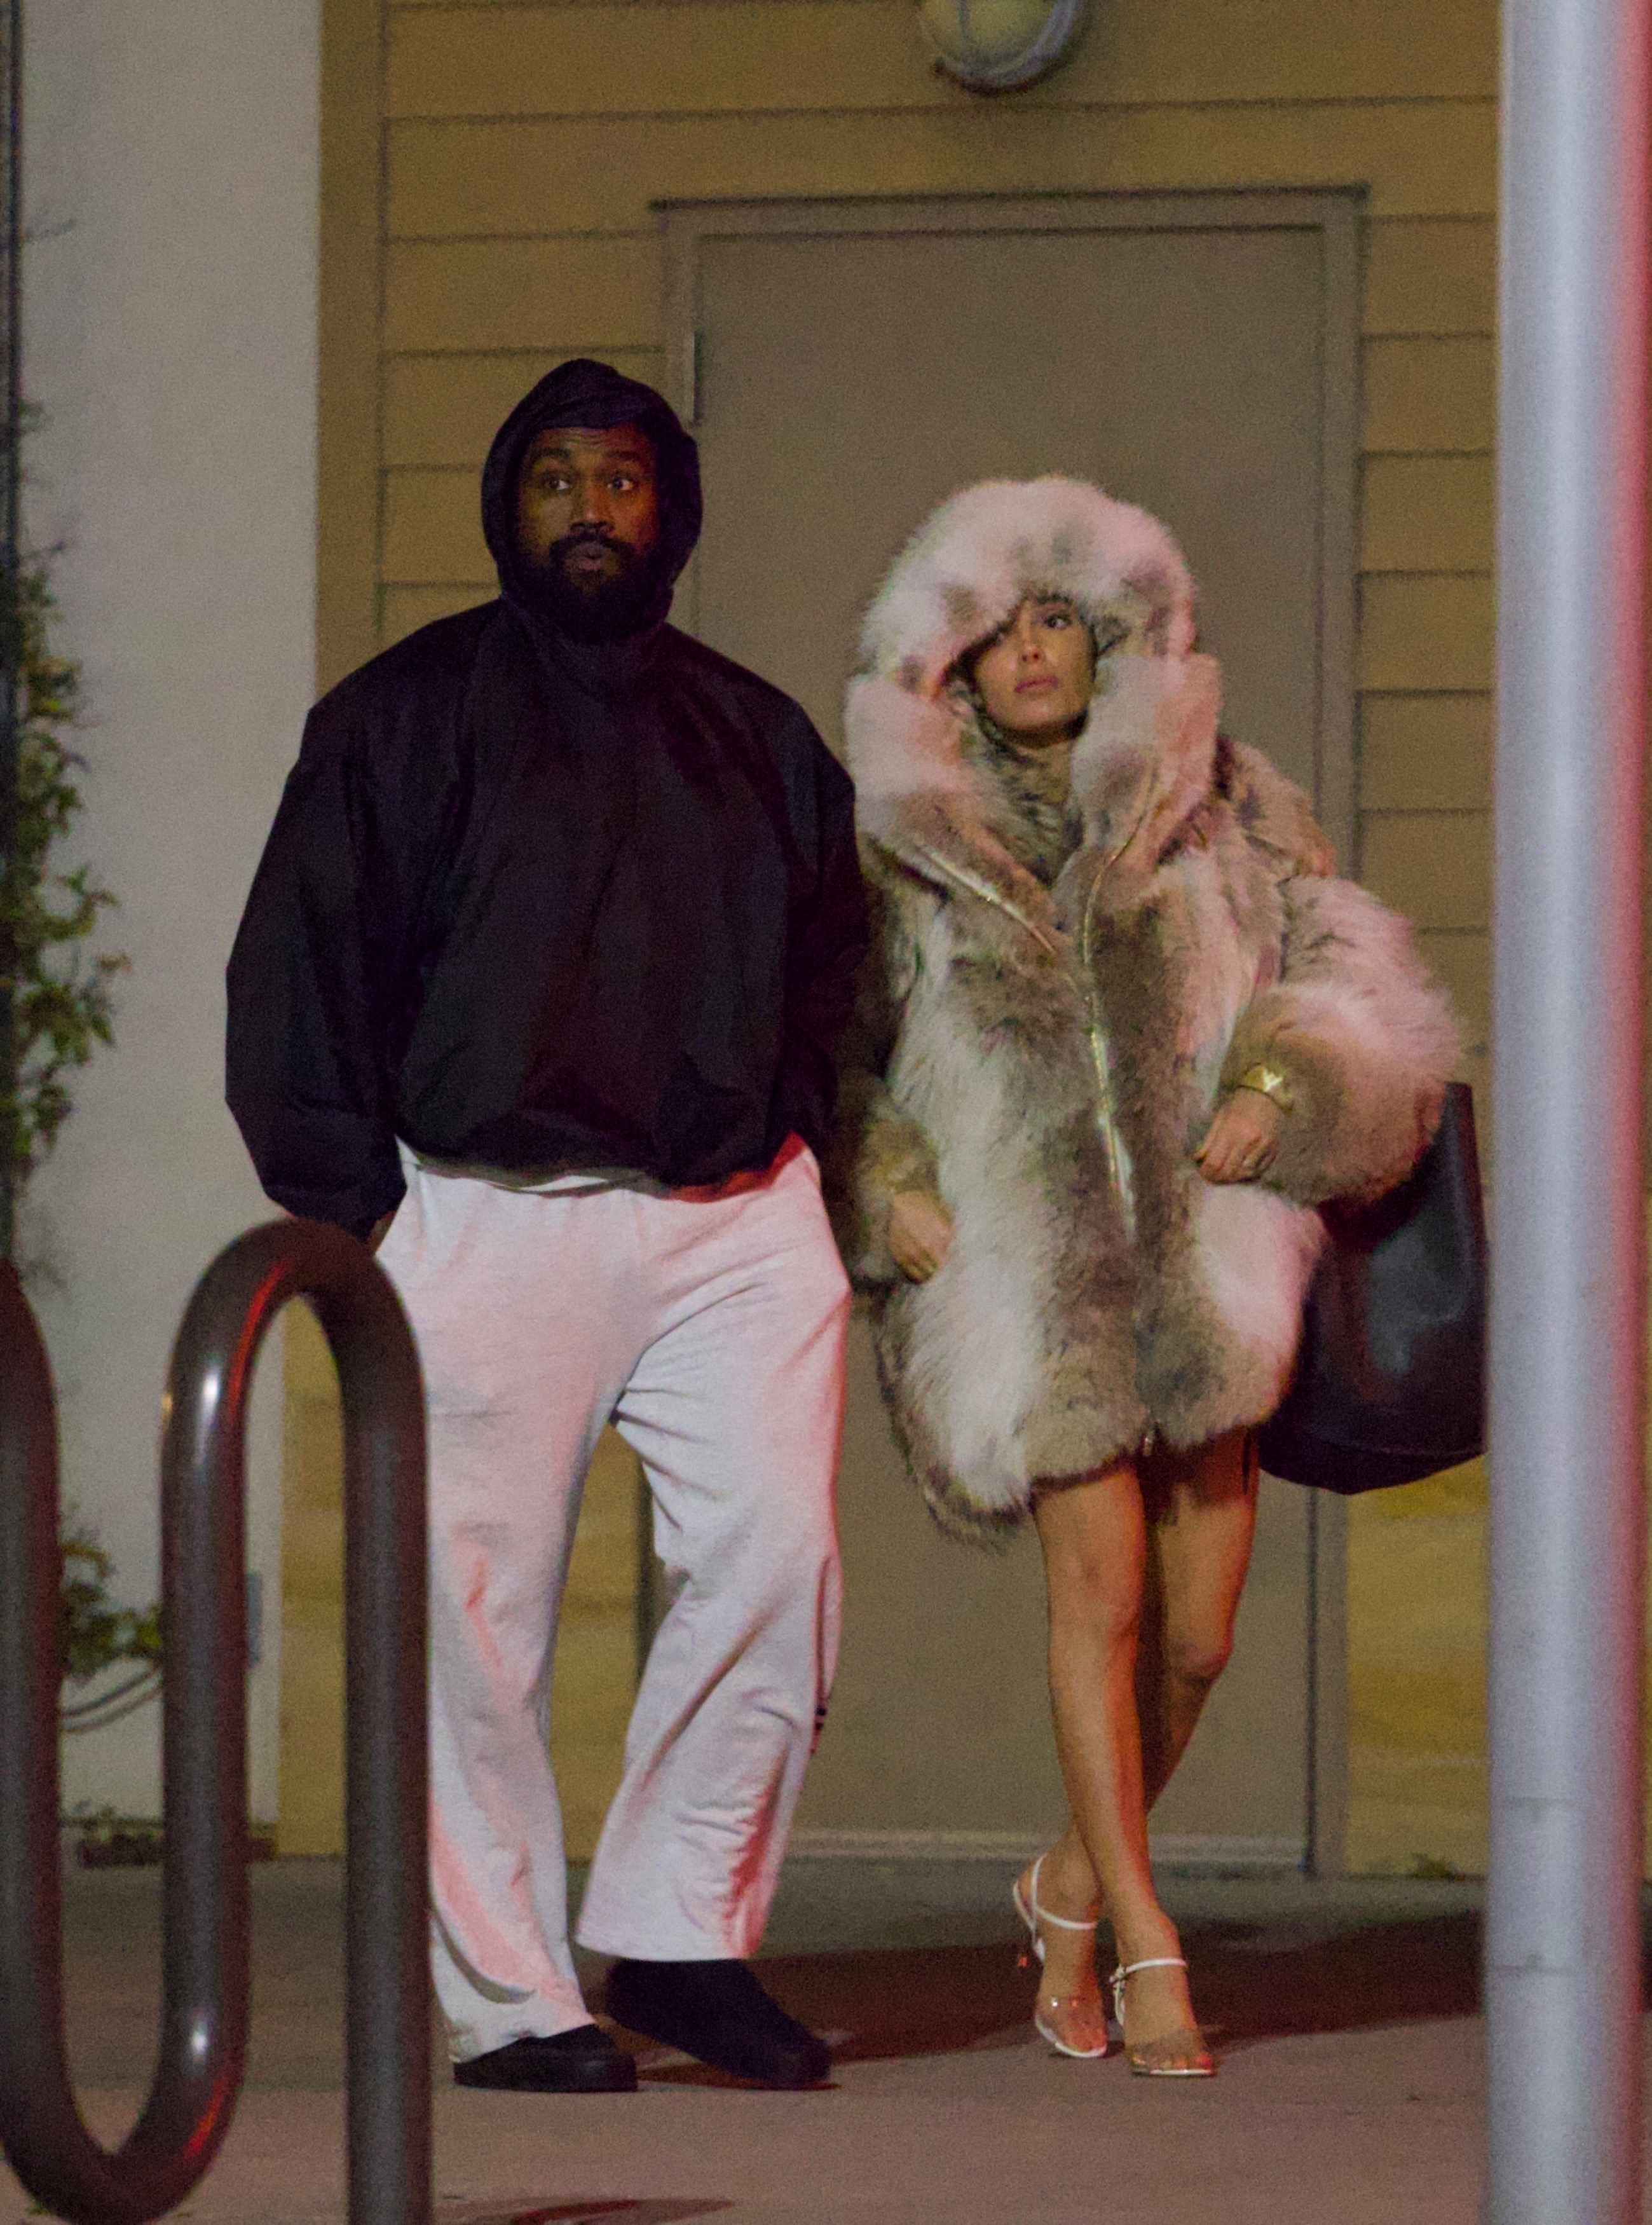 On Thursday, Bianca was seen wearing the gigantic fur coat - and not much else - as she departed a movie theater with Kanye